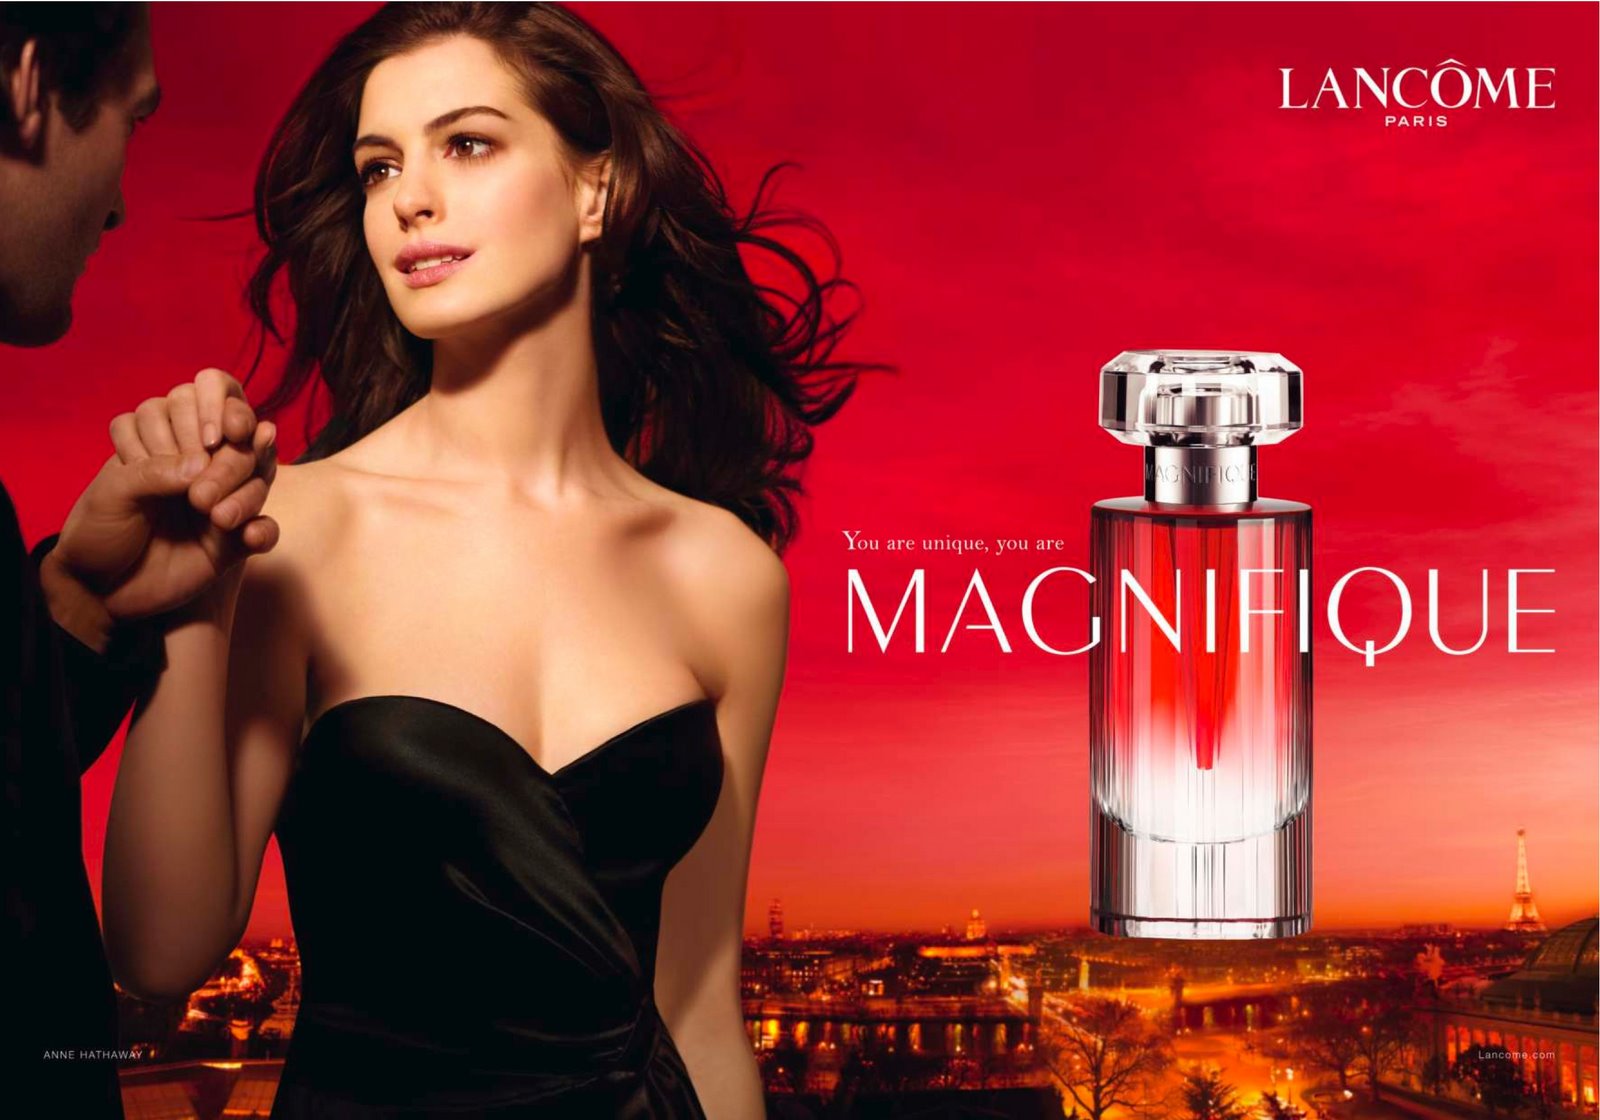 [anne+hathaway+for+lancome.jpg]